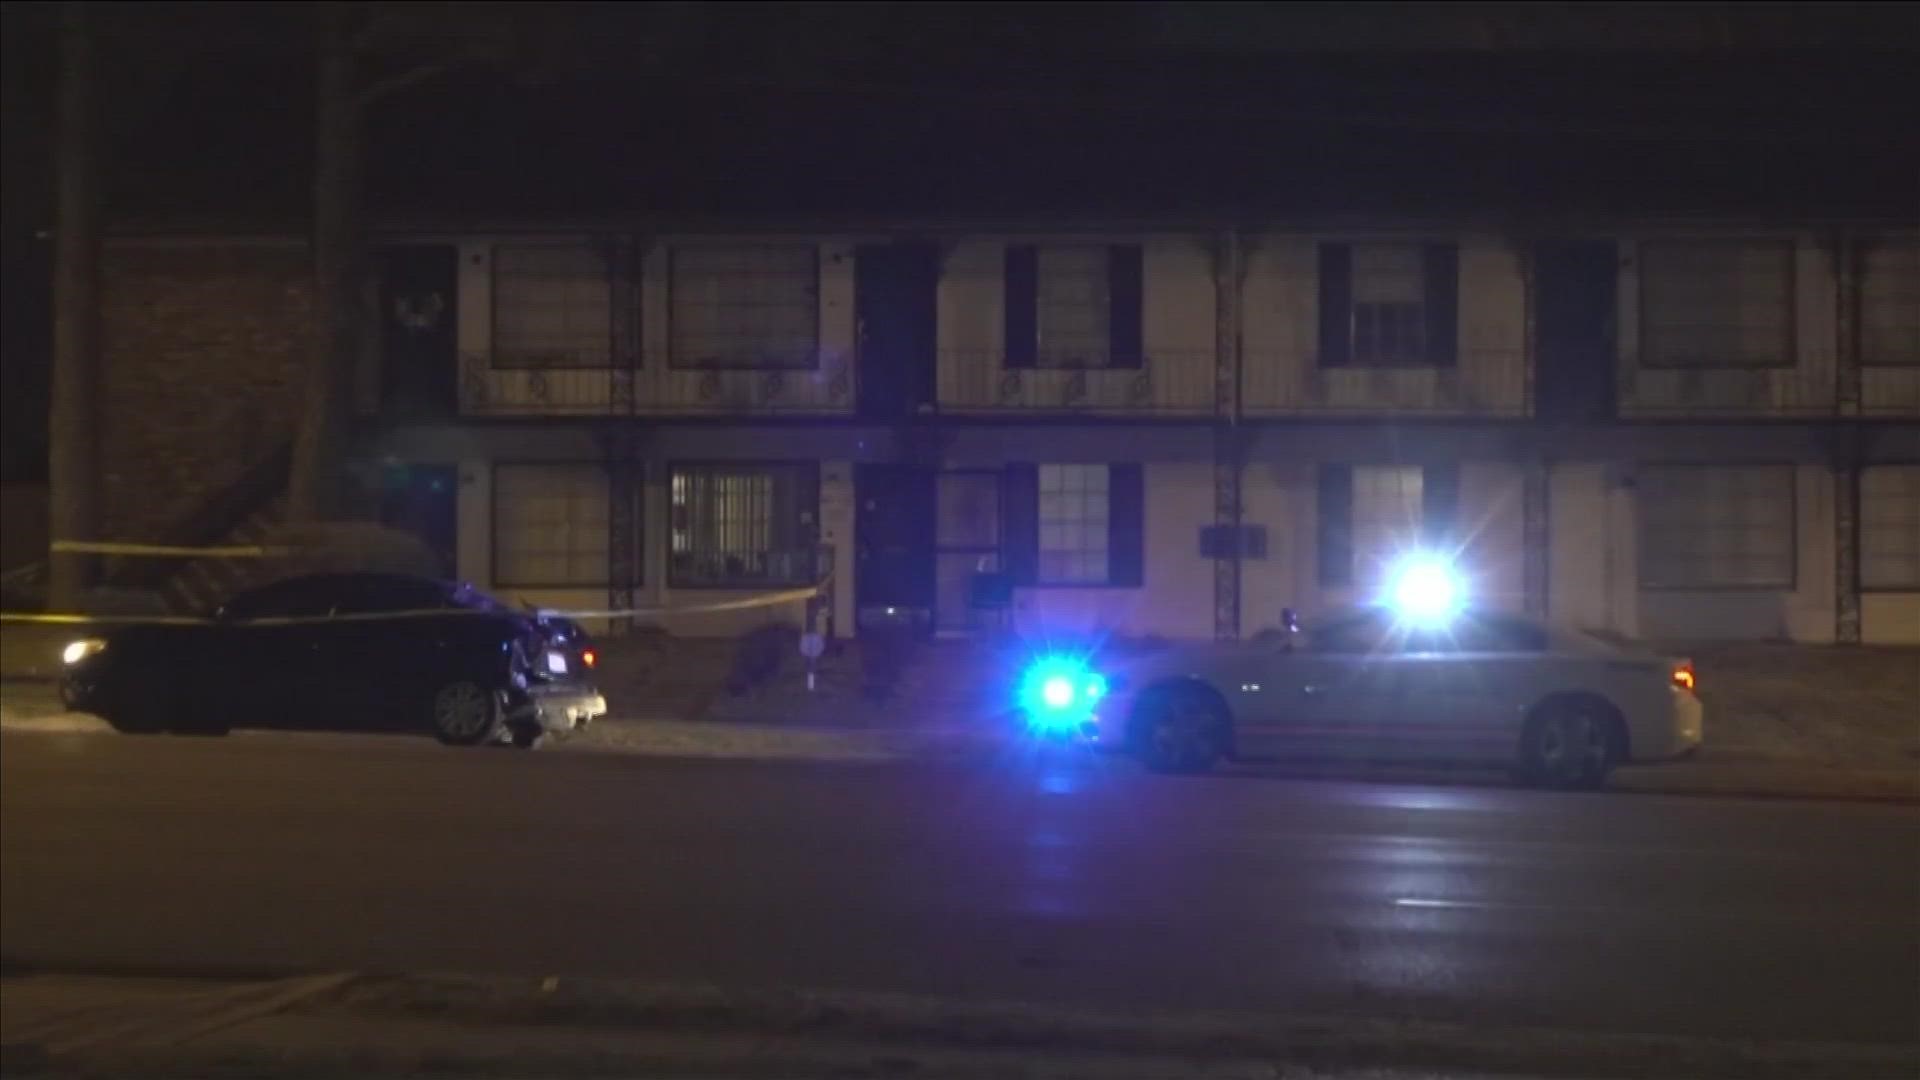 The shooting happened at 6:38 p.m., MPD said, and officers responded to the scene at the 3700 block of Outland Road.